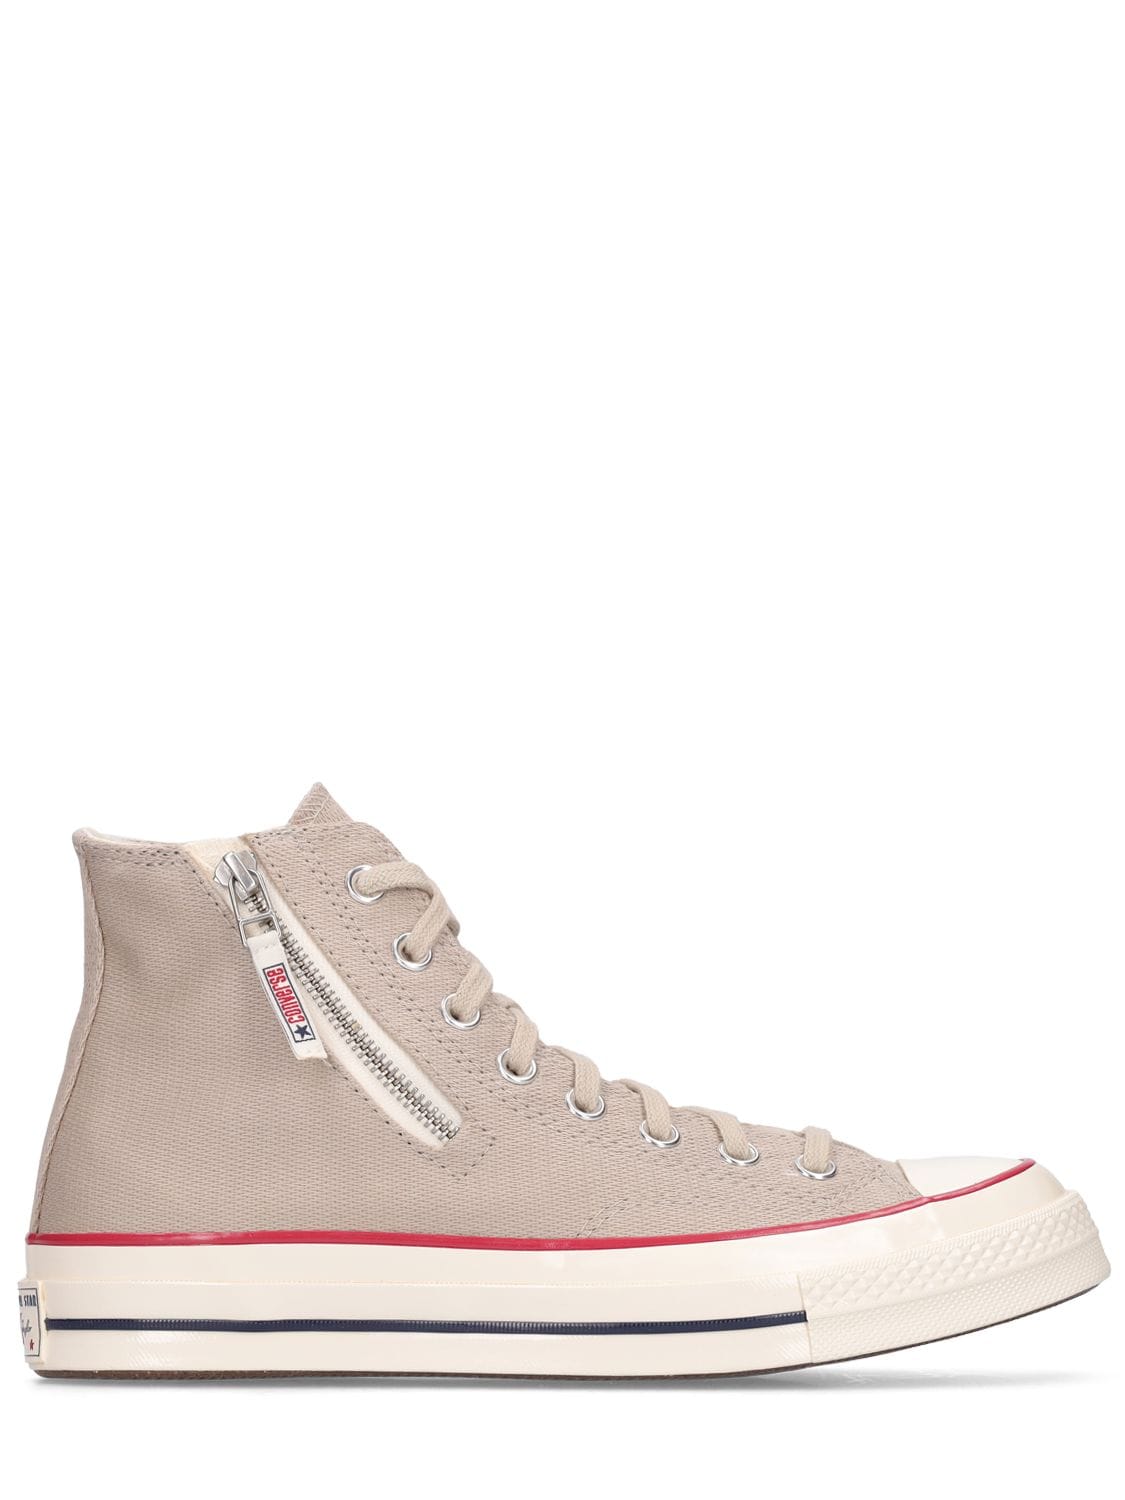 Image of Chuck 70 Side Zip High Sneakers